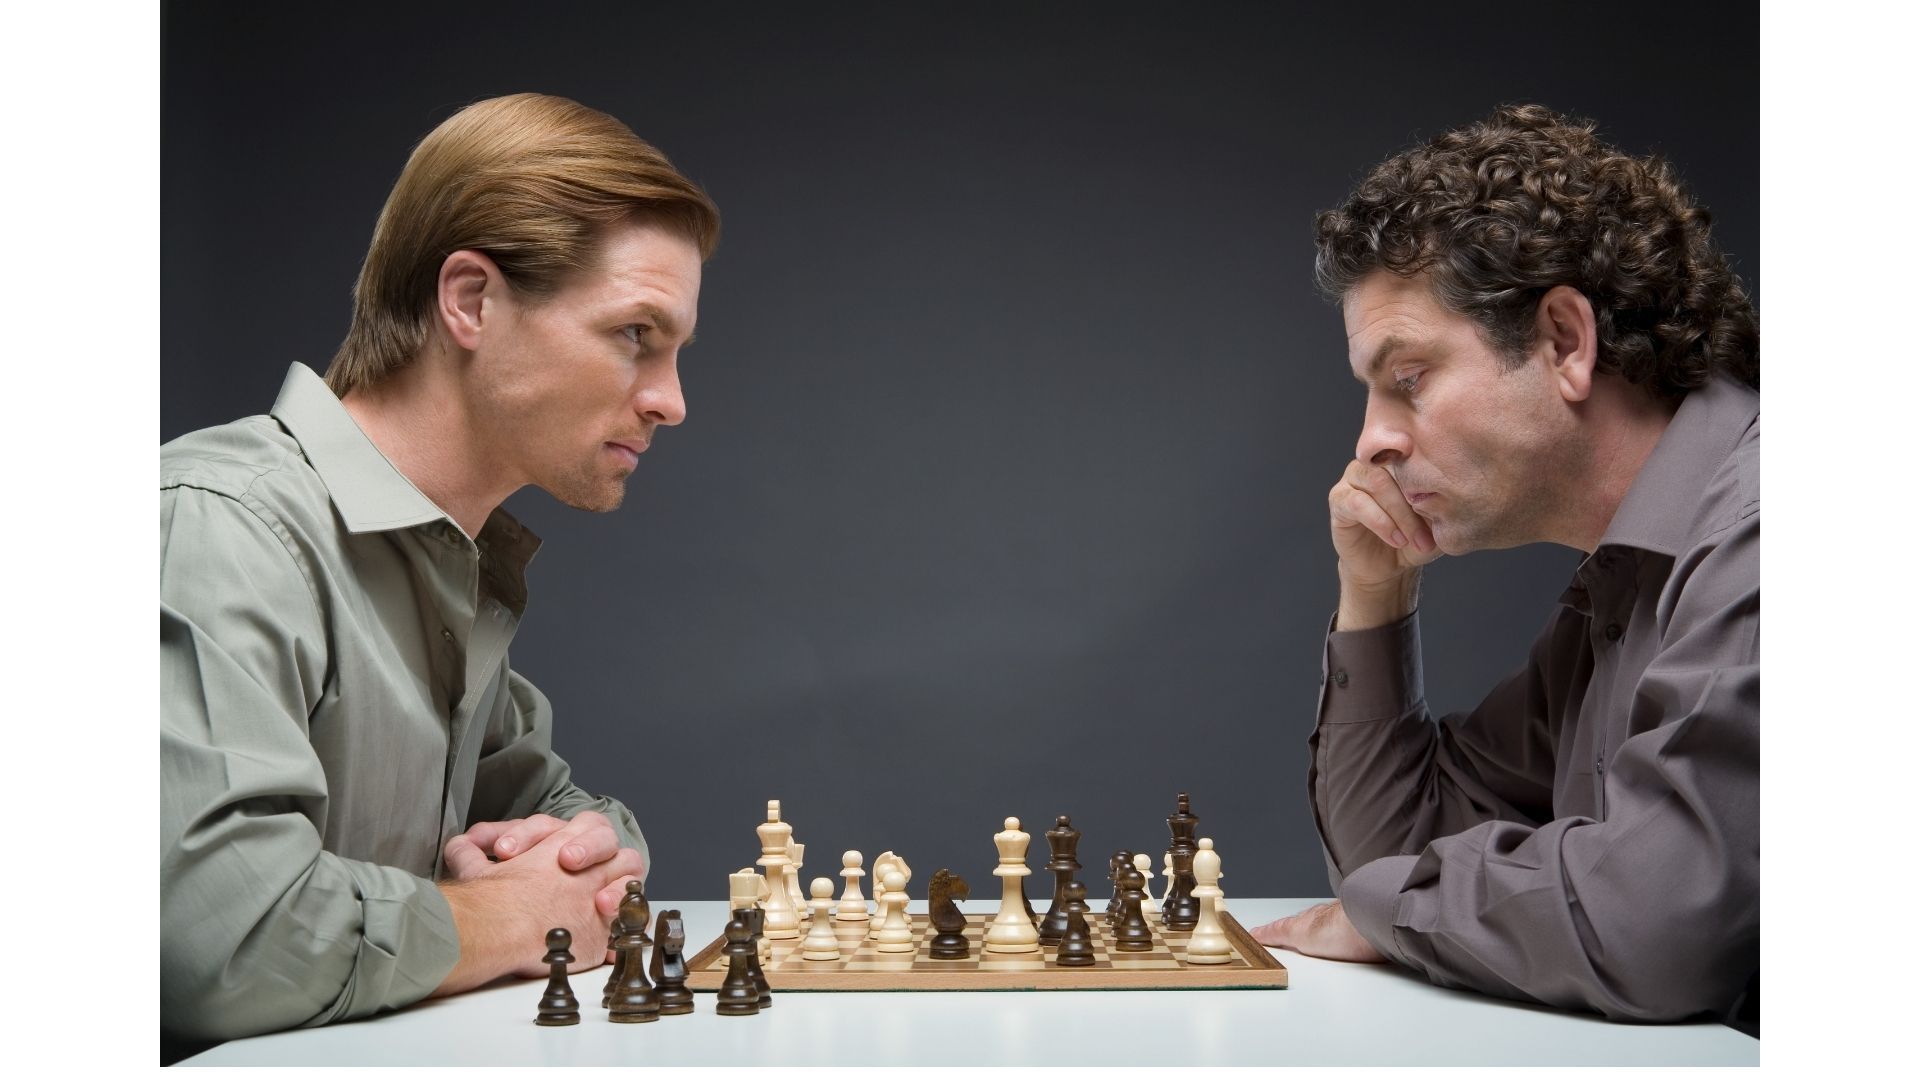 How chess helps brain function efficiently